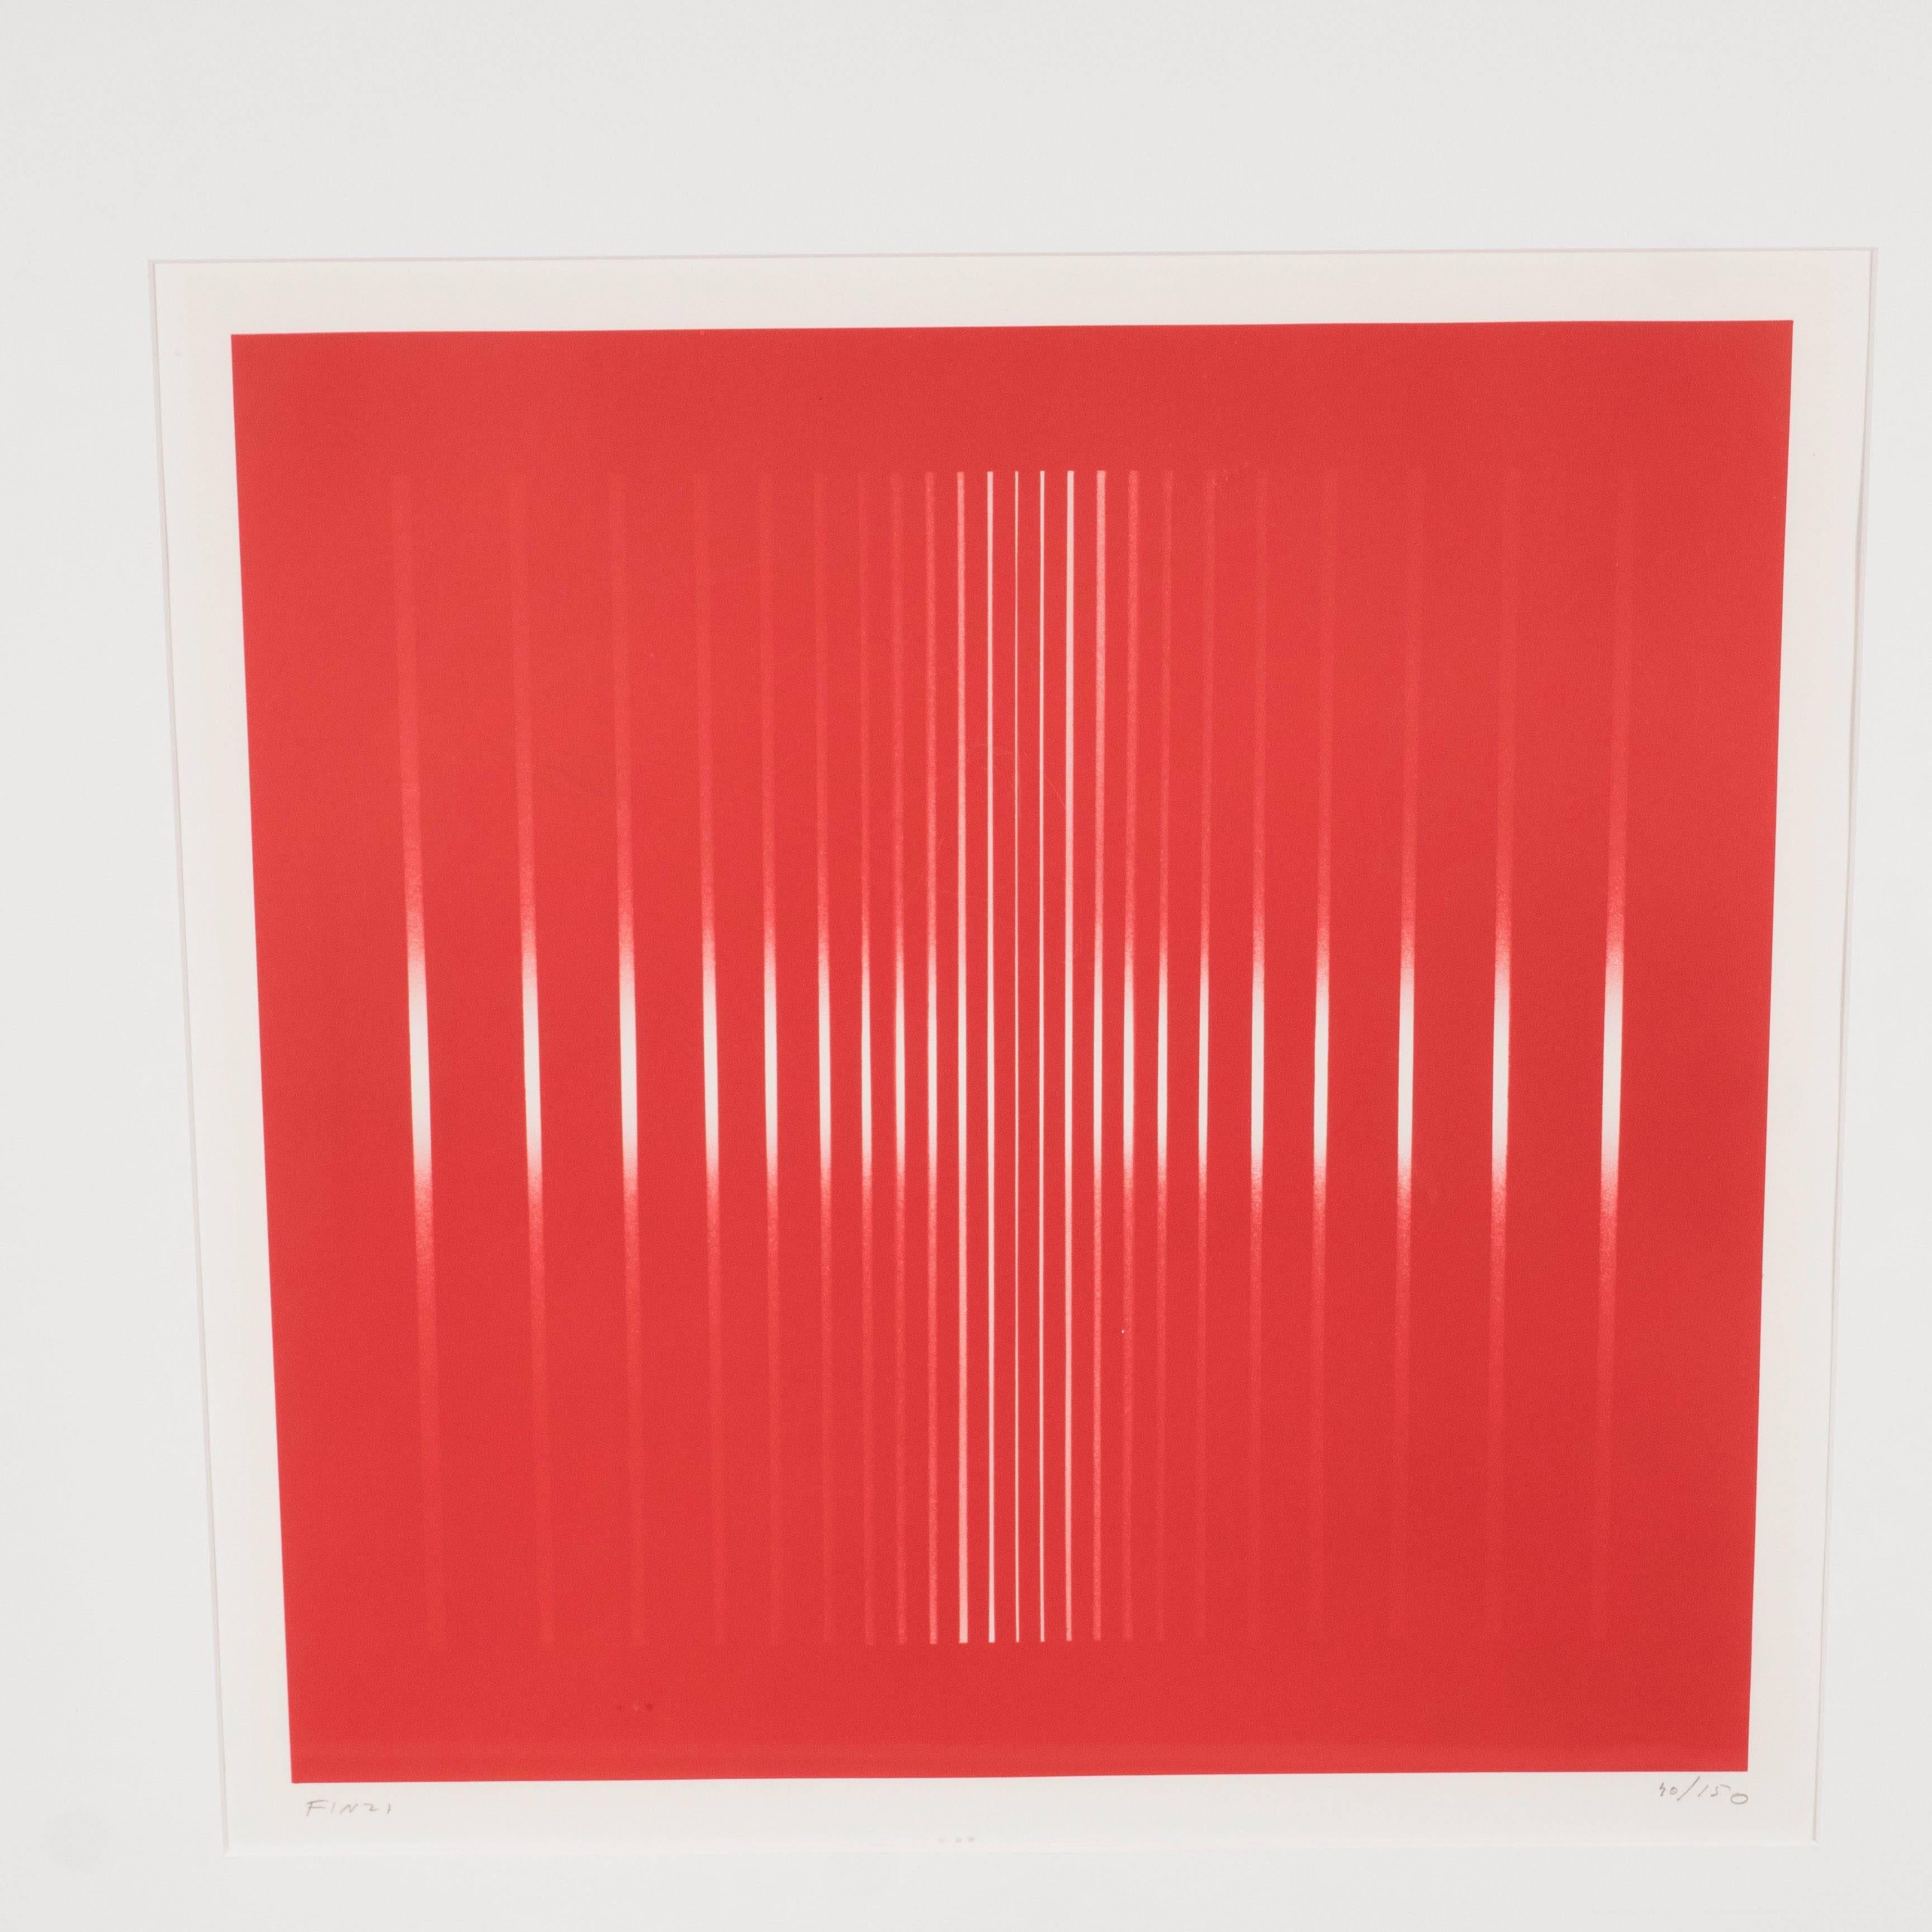 A Mid-Century op-art serigraph, signed Finzi. This piece is very much in the style of Vasarely. Vertical white bands on a red background demonstrate the optical illusion of sensory perception on depth and dimension. This piece is labeled as part of